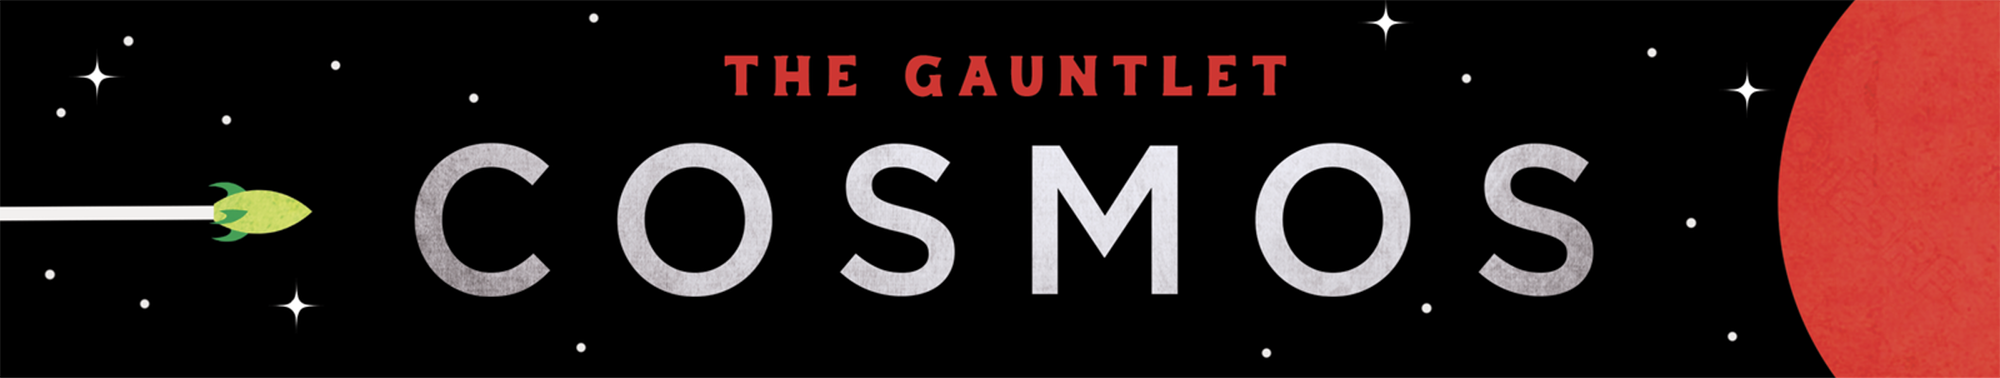 The Gauntlet: Cosmos. White text for a space background with a small green spaceship on the left flying towards a large red planet on the right